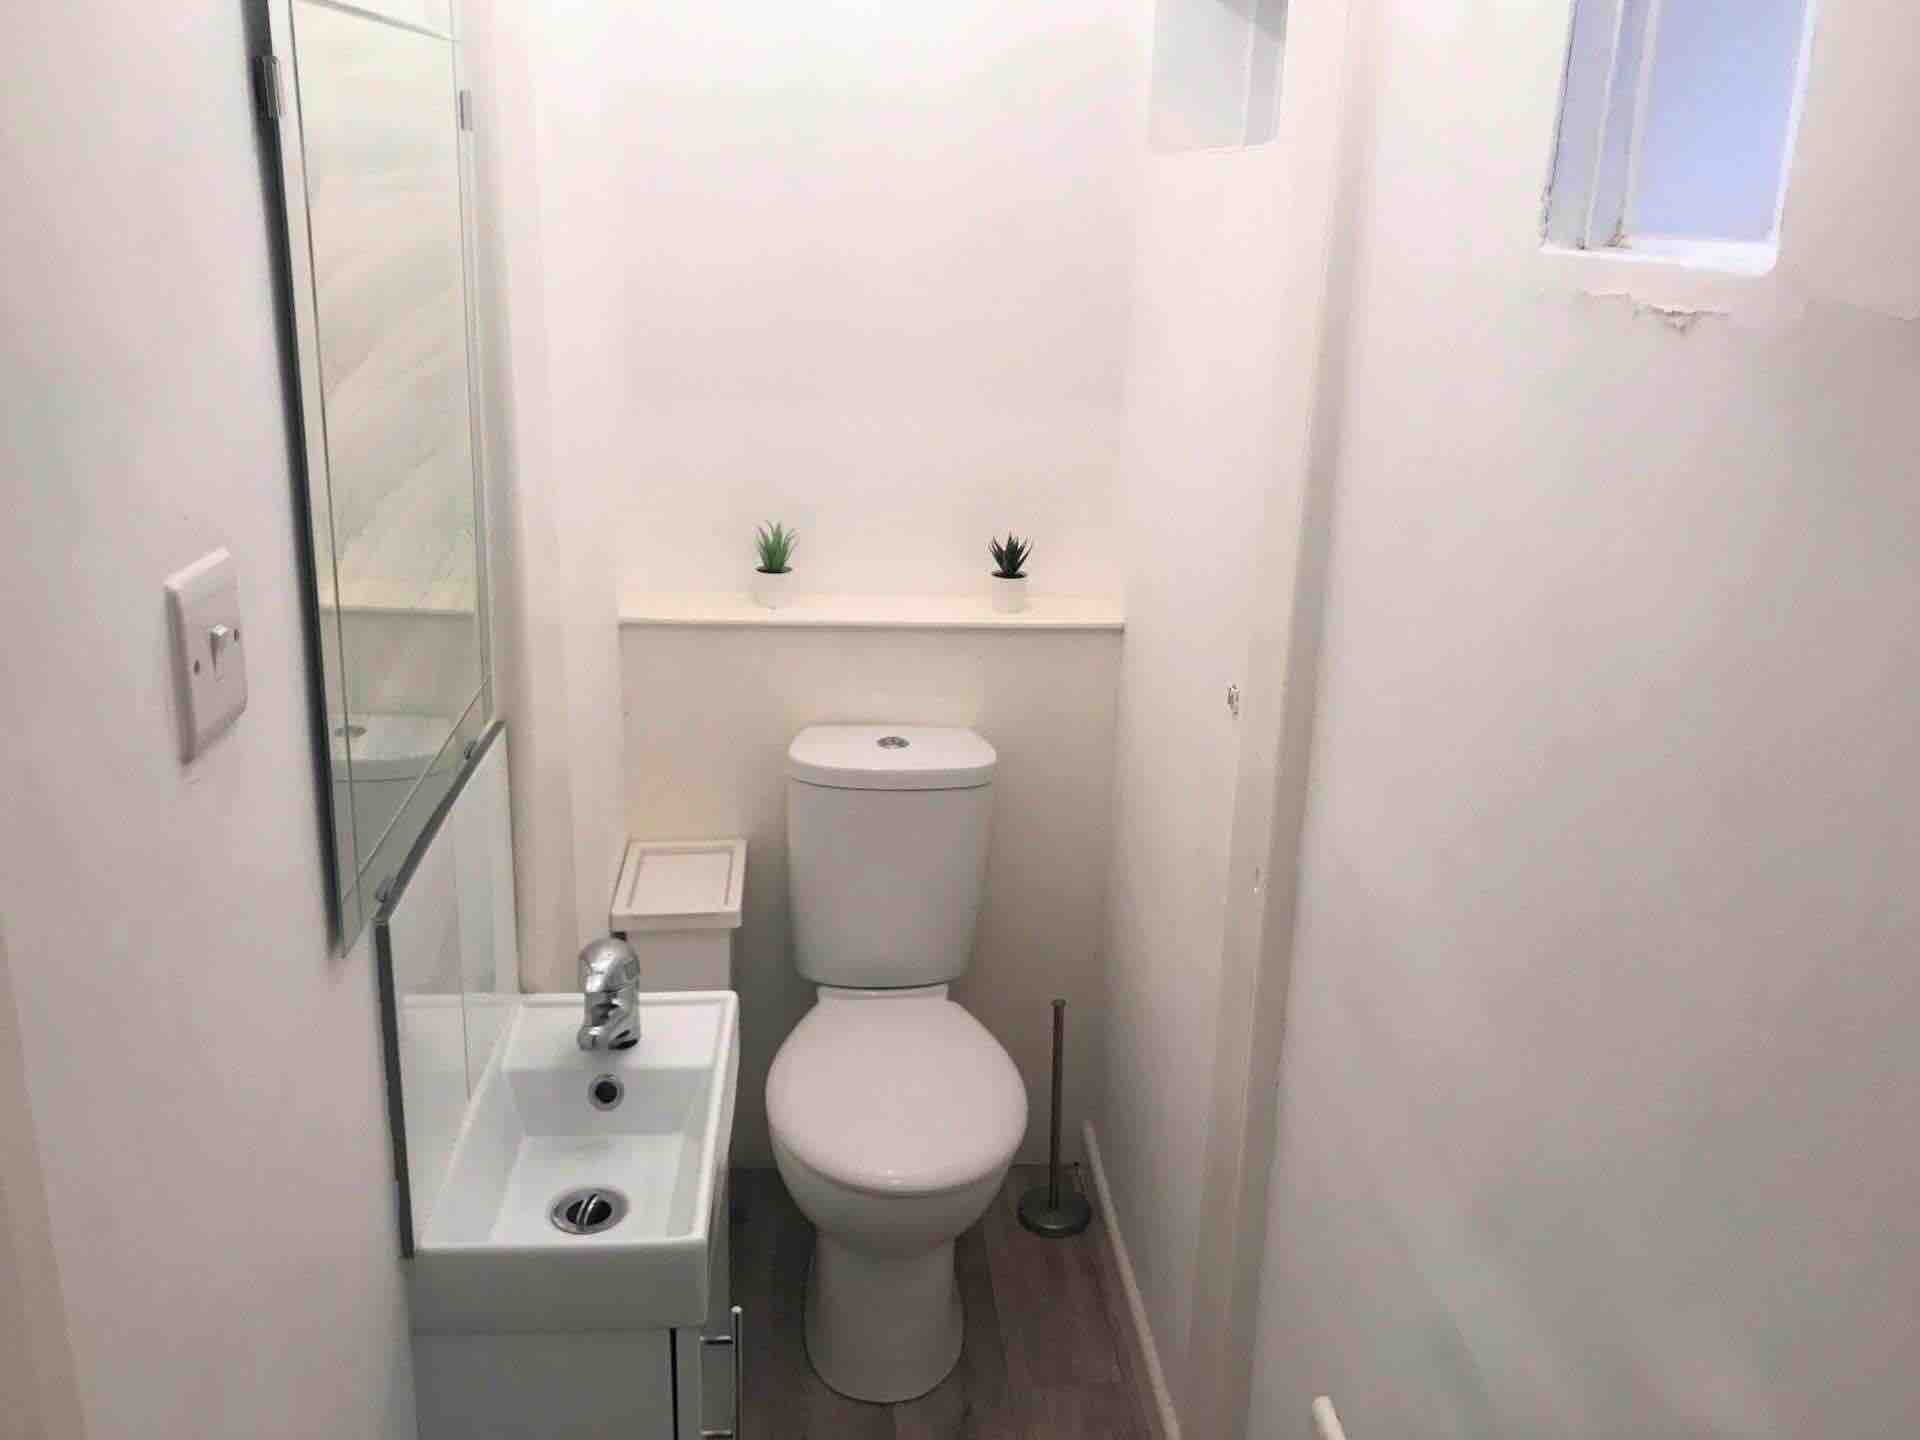 One bedroom apartment for rent RoomsLocal image